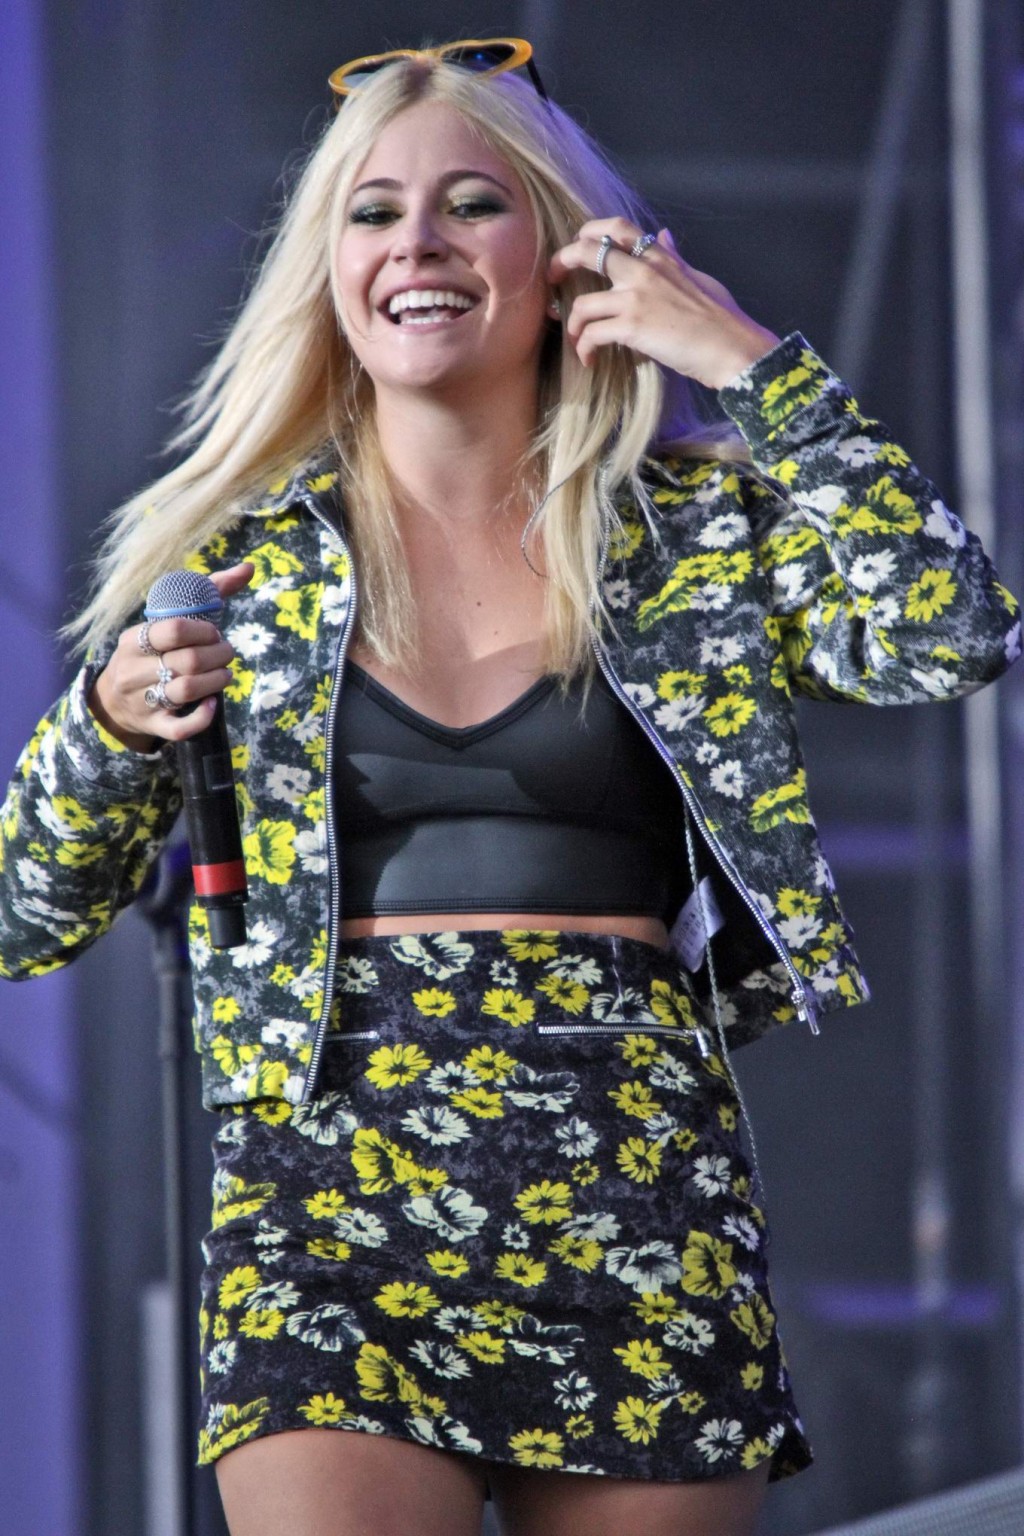 Pixie lott upskirt sul palco a totale accesso live 2014 in cheshire
 #75188610